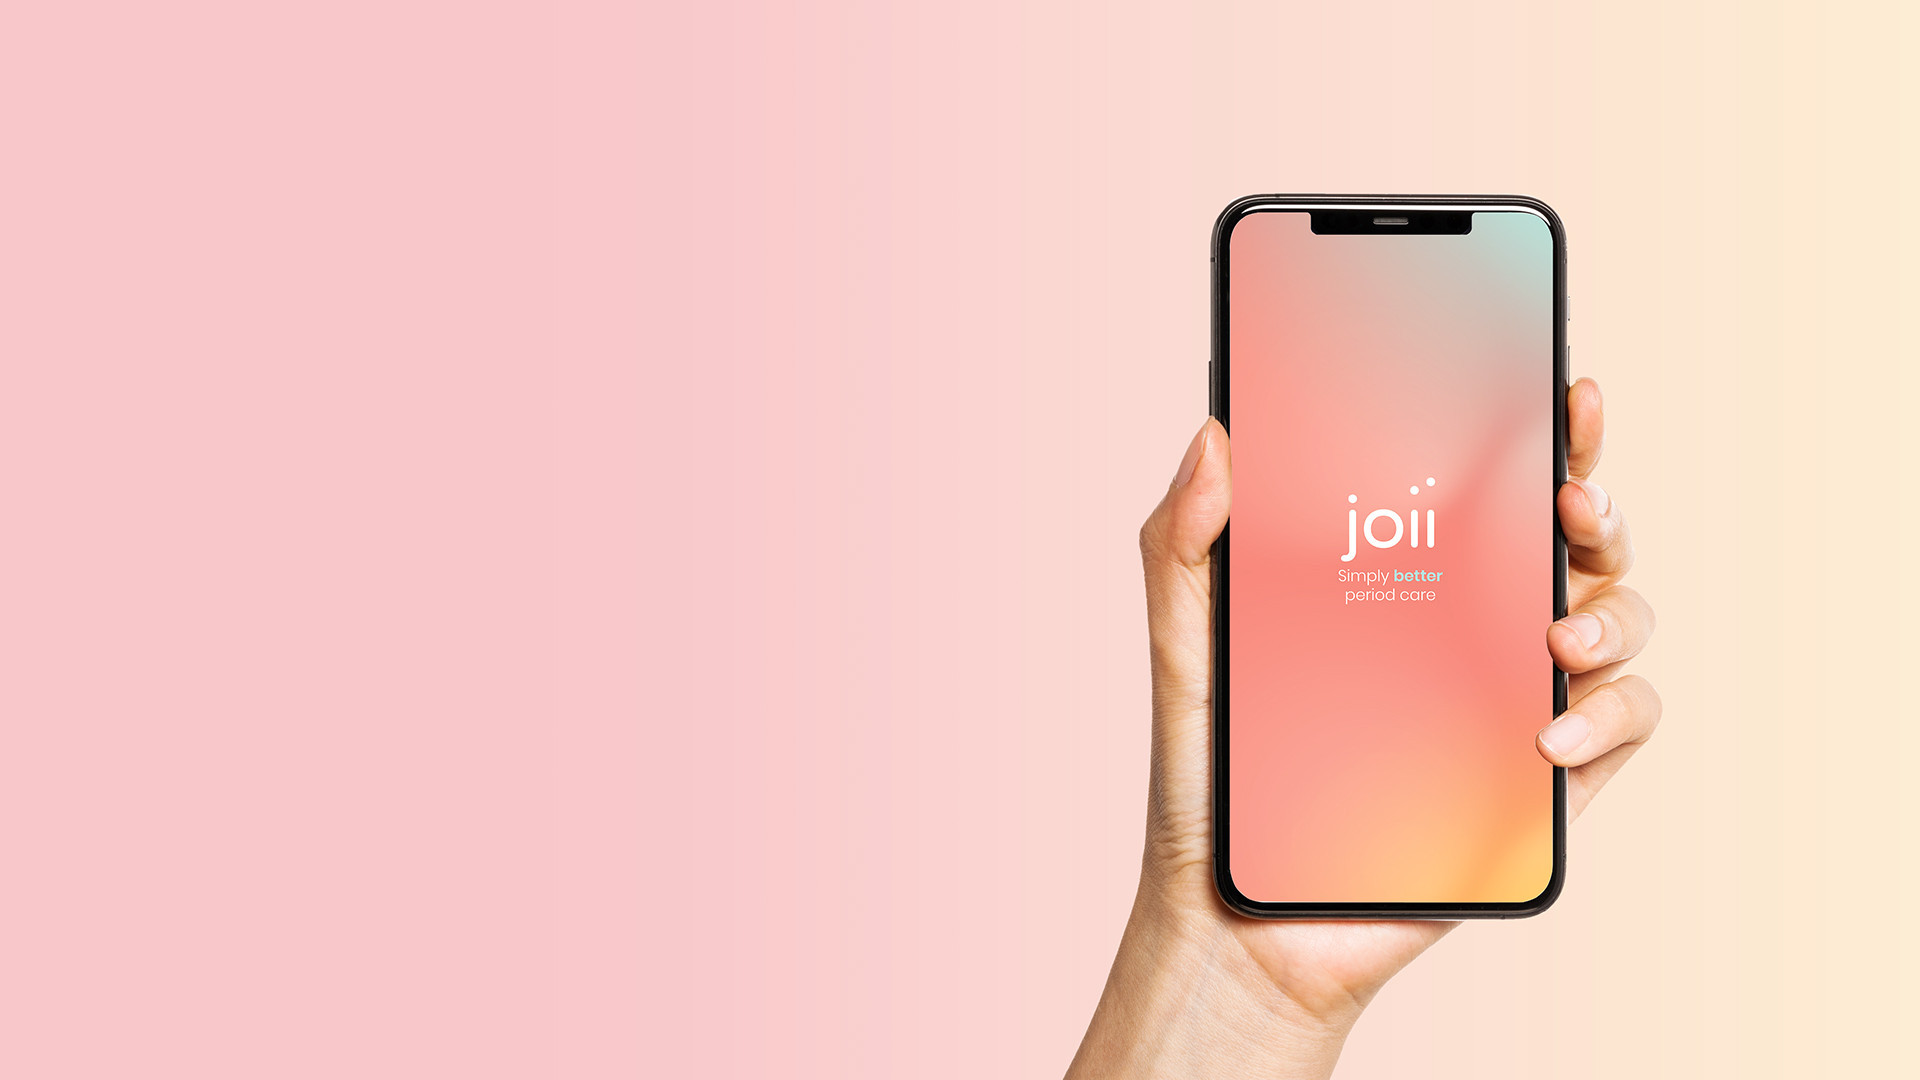 Gradient pink background. Hand holding a smartphone displaying the Joii app home screen